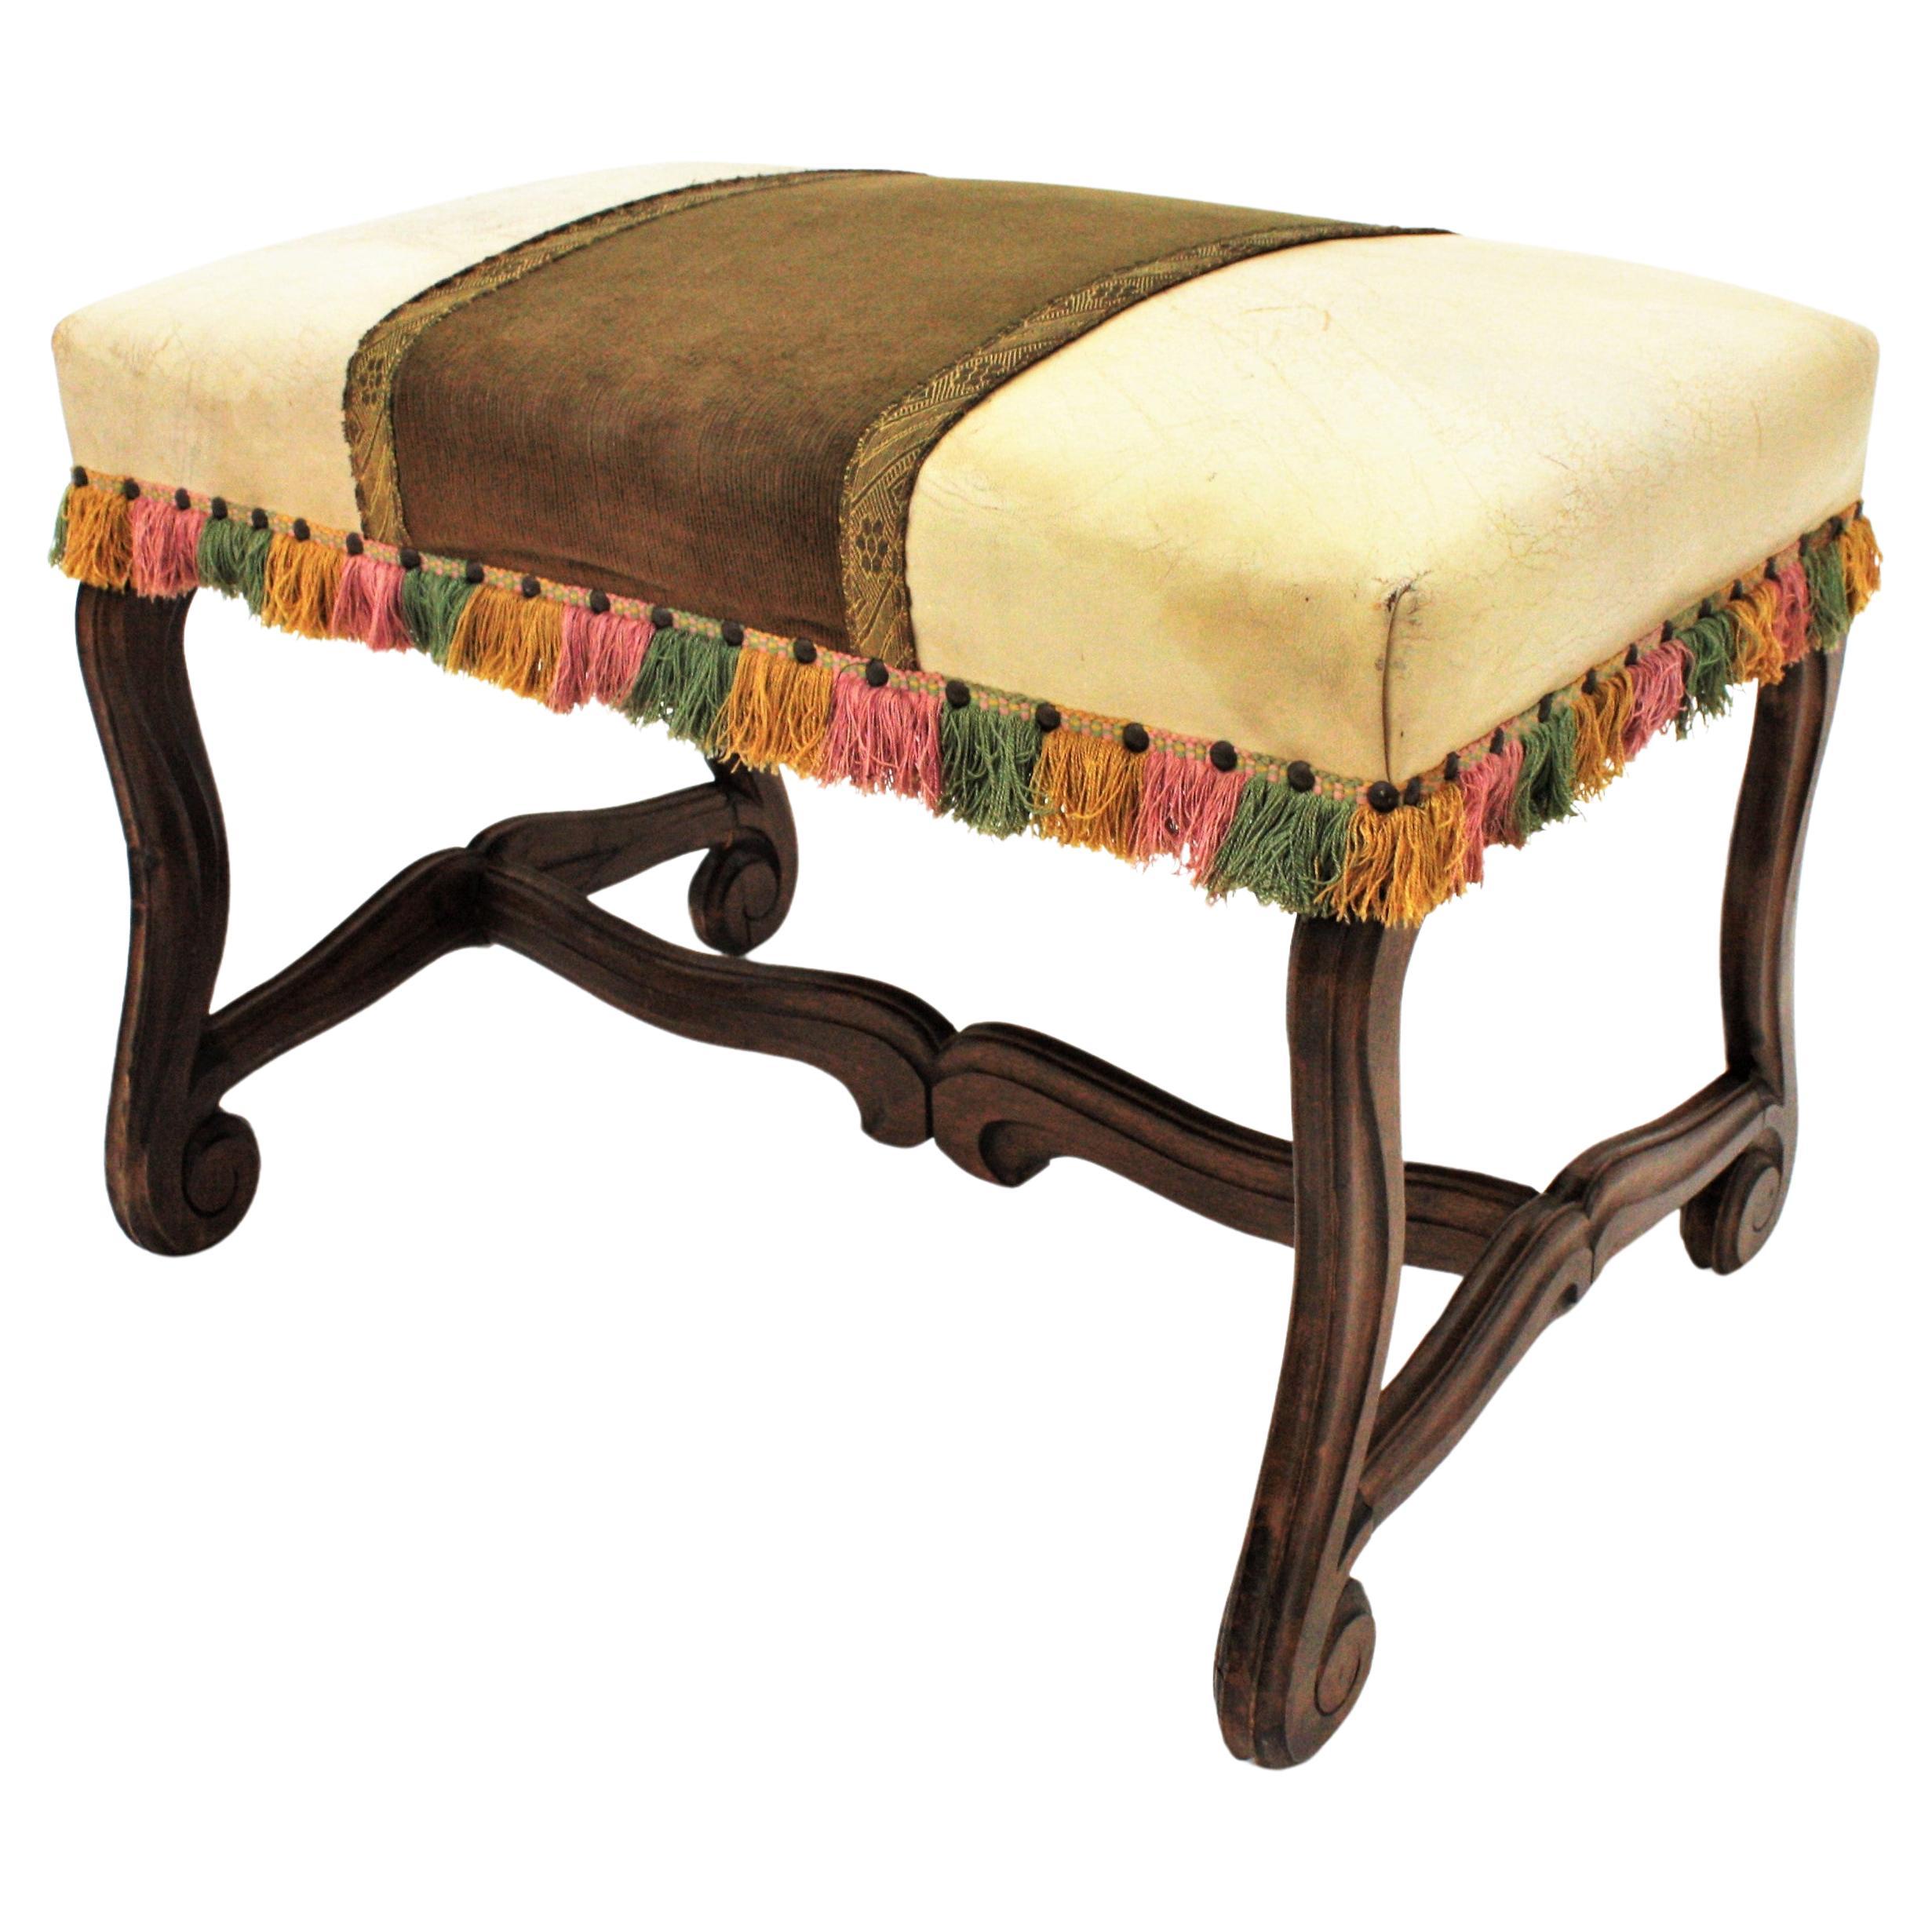 Spanish Louis XIV style Ottoman, 
Beautiful Louis XIV style bench or stool raised on four Os de Mouton hand carved walnut legs with stretcher, Spain, 1930s.
This stylish banquette has a stretcher joining the legs and scroll motif accents
It is in